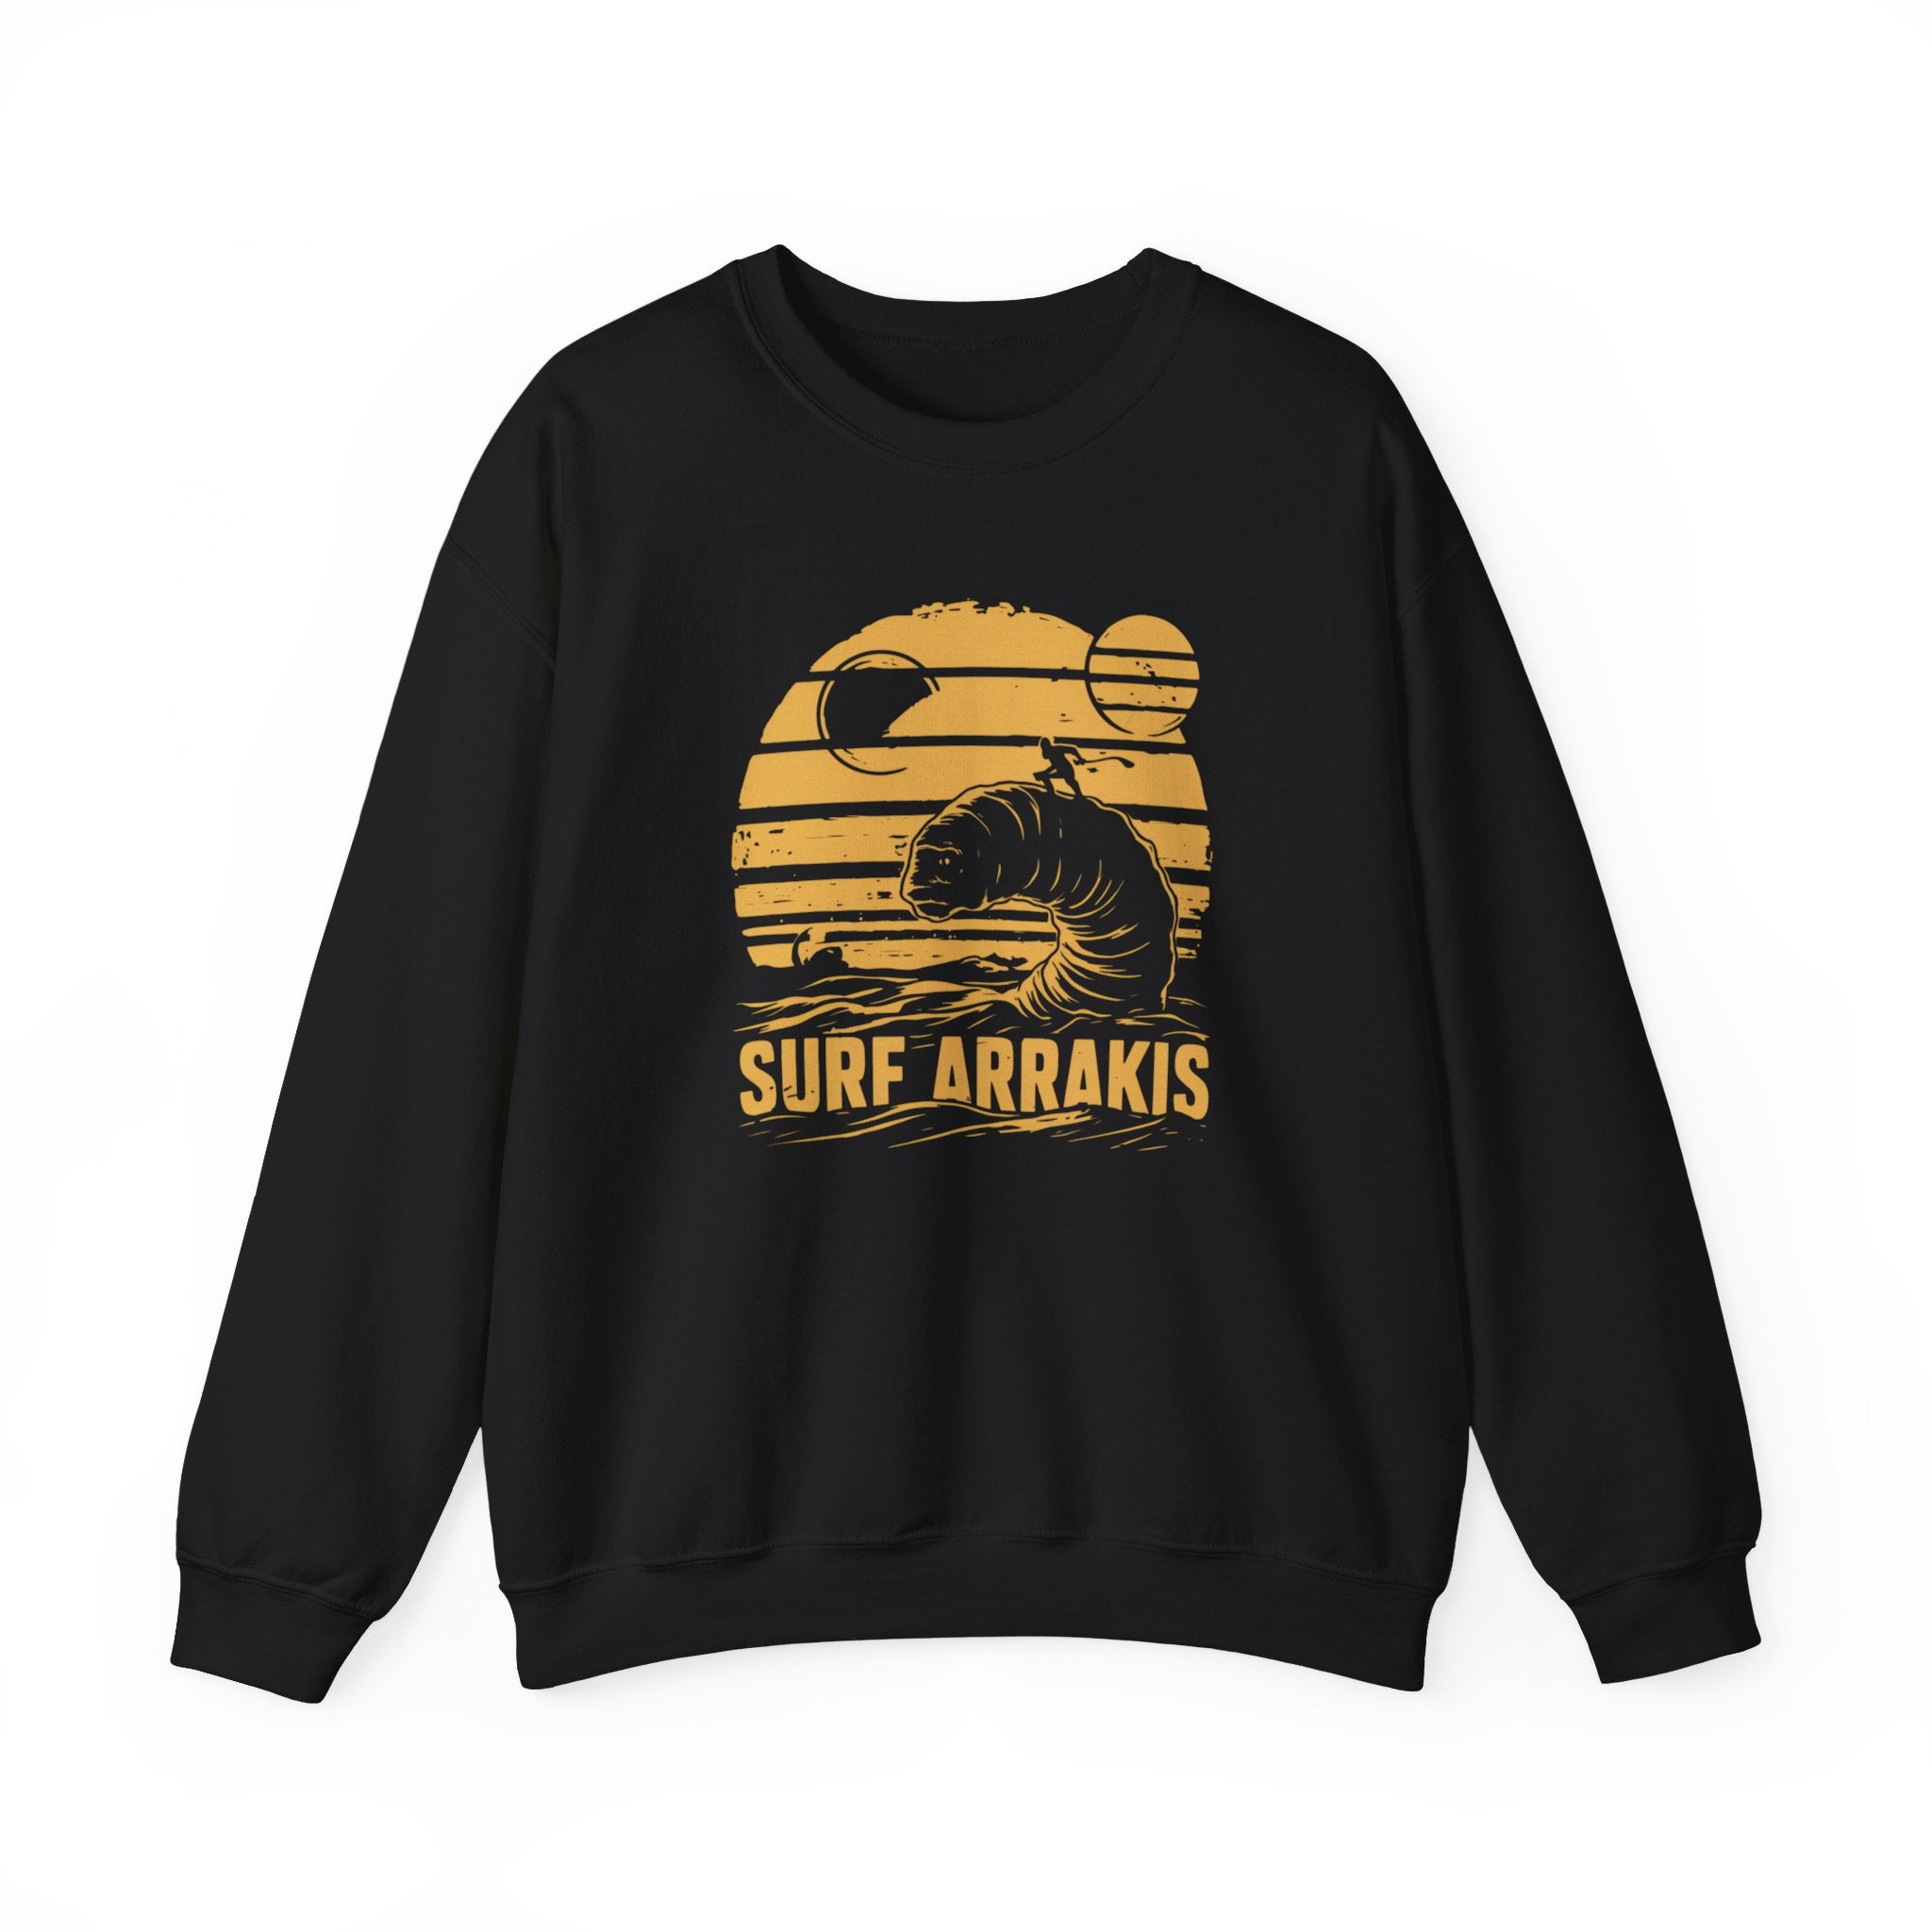 This Surf Arrakis - Sweatshirt features a graphic of a sandworm surfing waves under two moons, making it perfect for the colder months with its unique design.